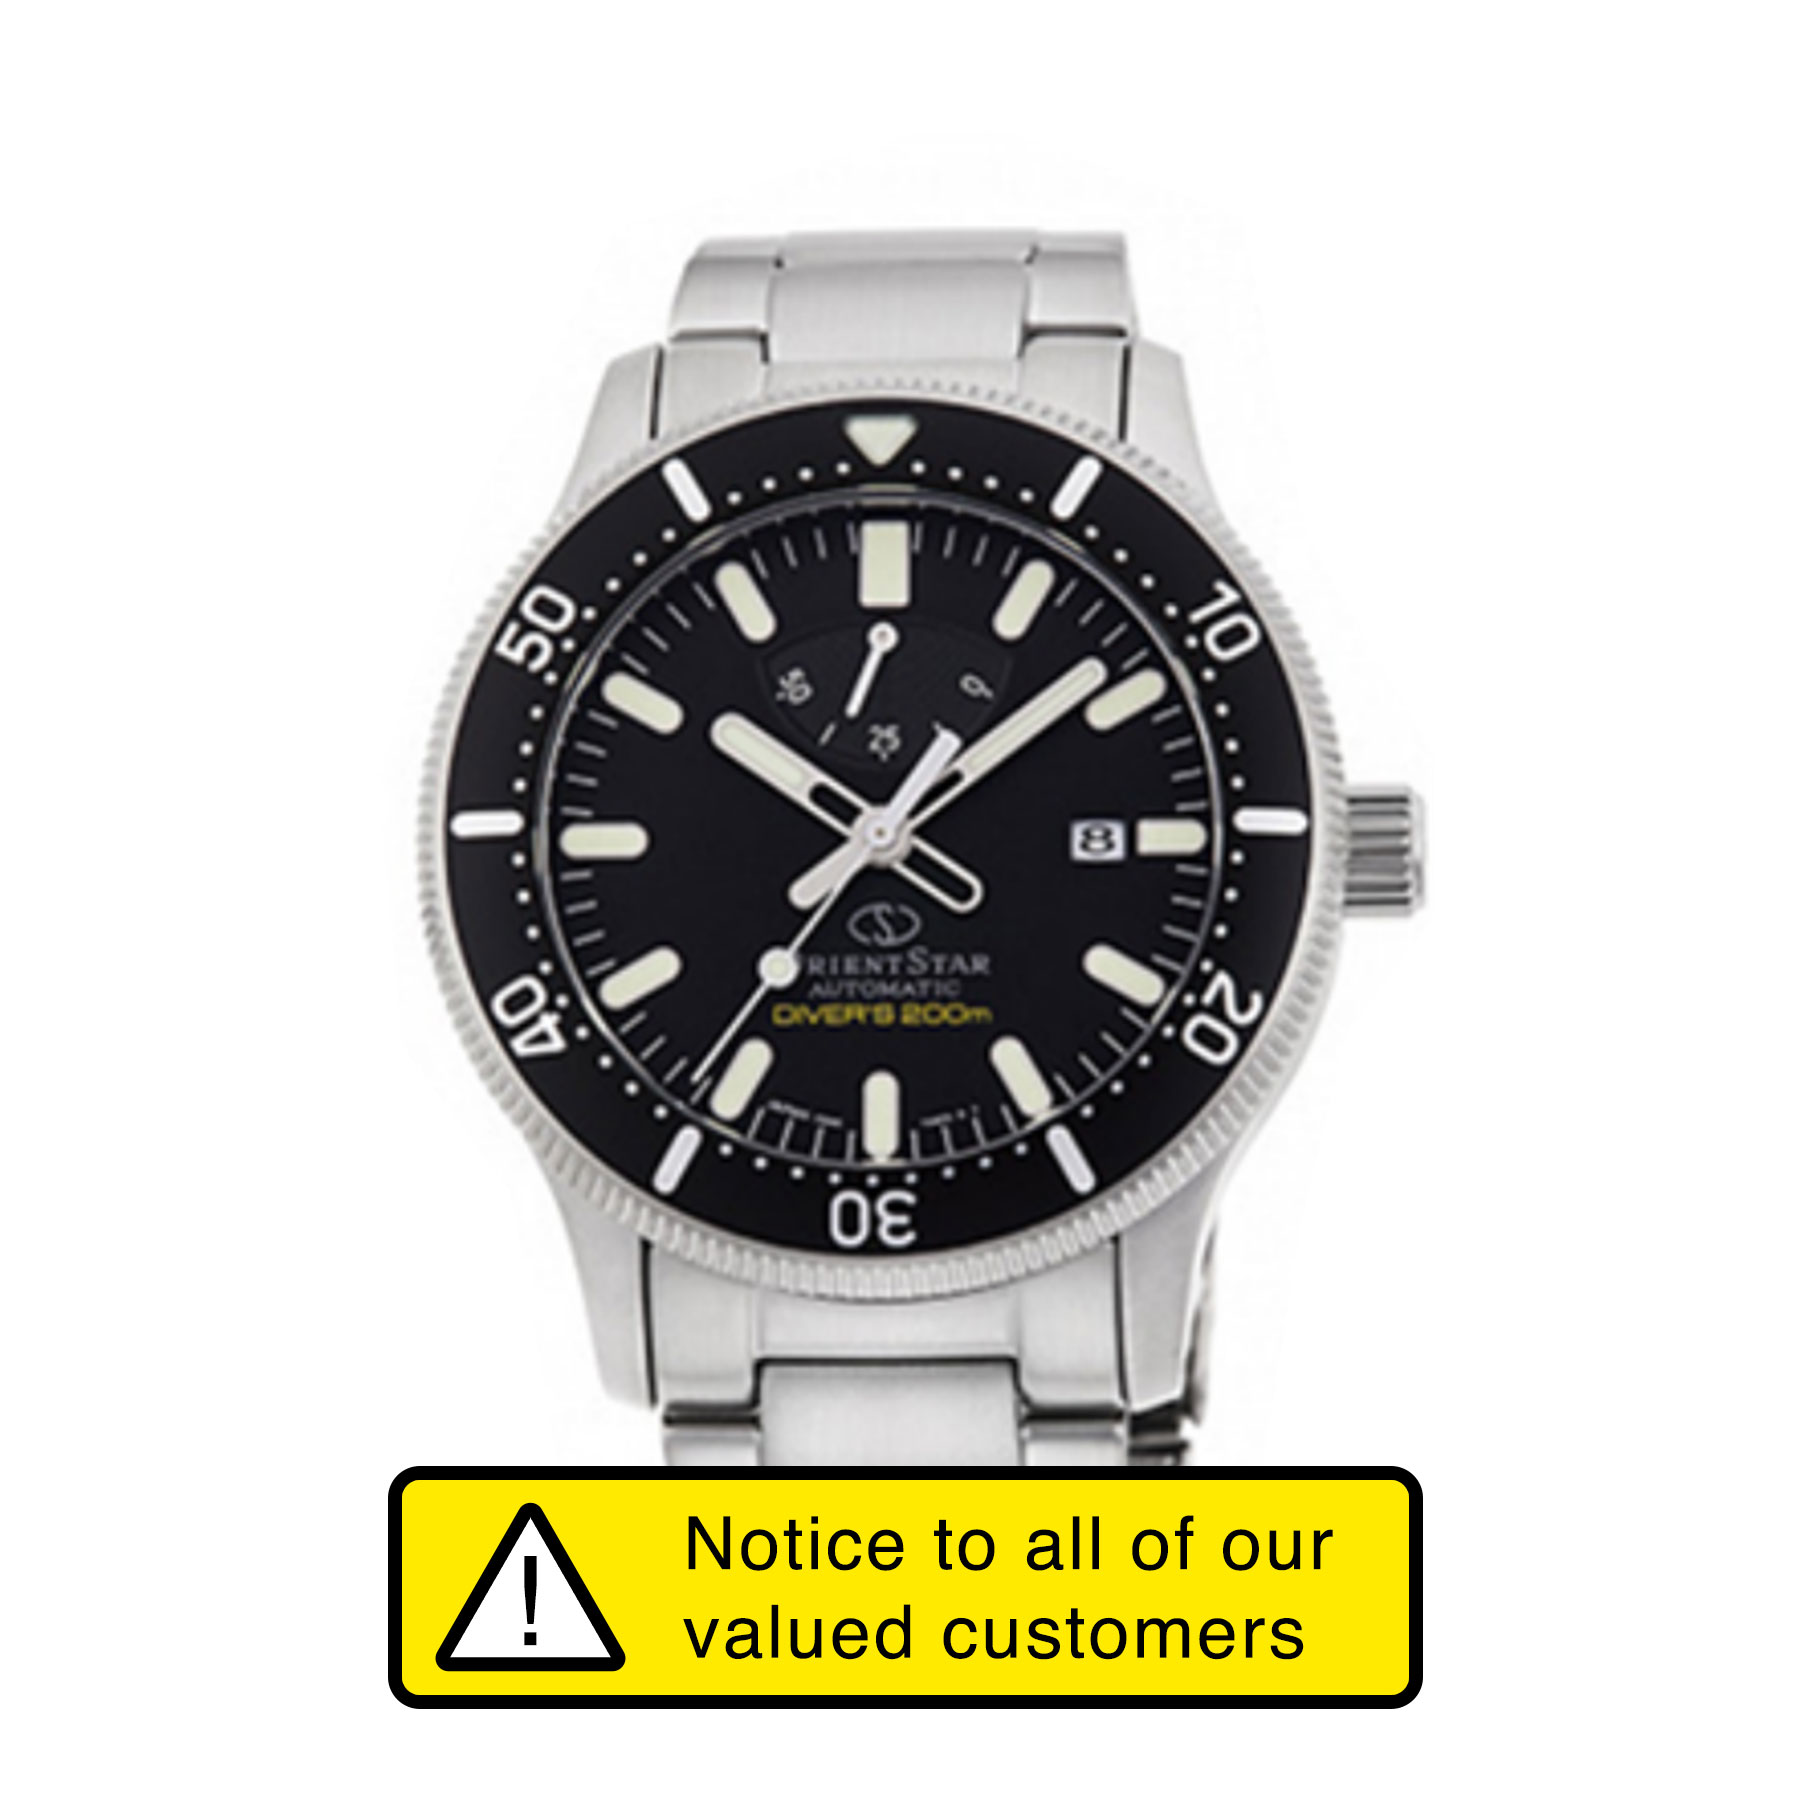 Notice to all of our valued customers Free repair of malfunctioning part of ORIENT STAR Diver Watch